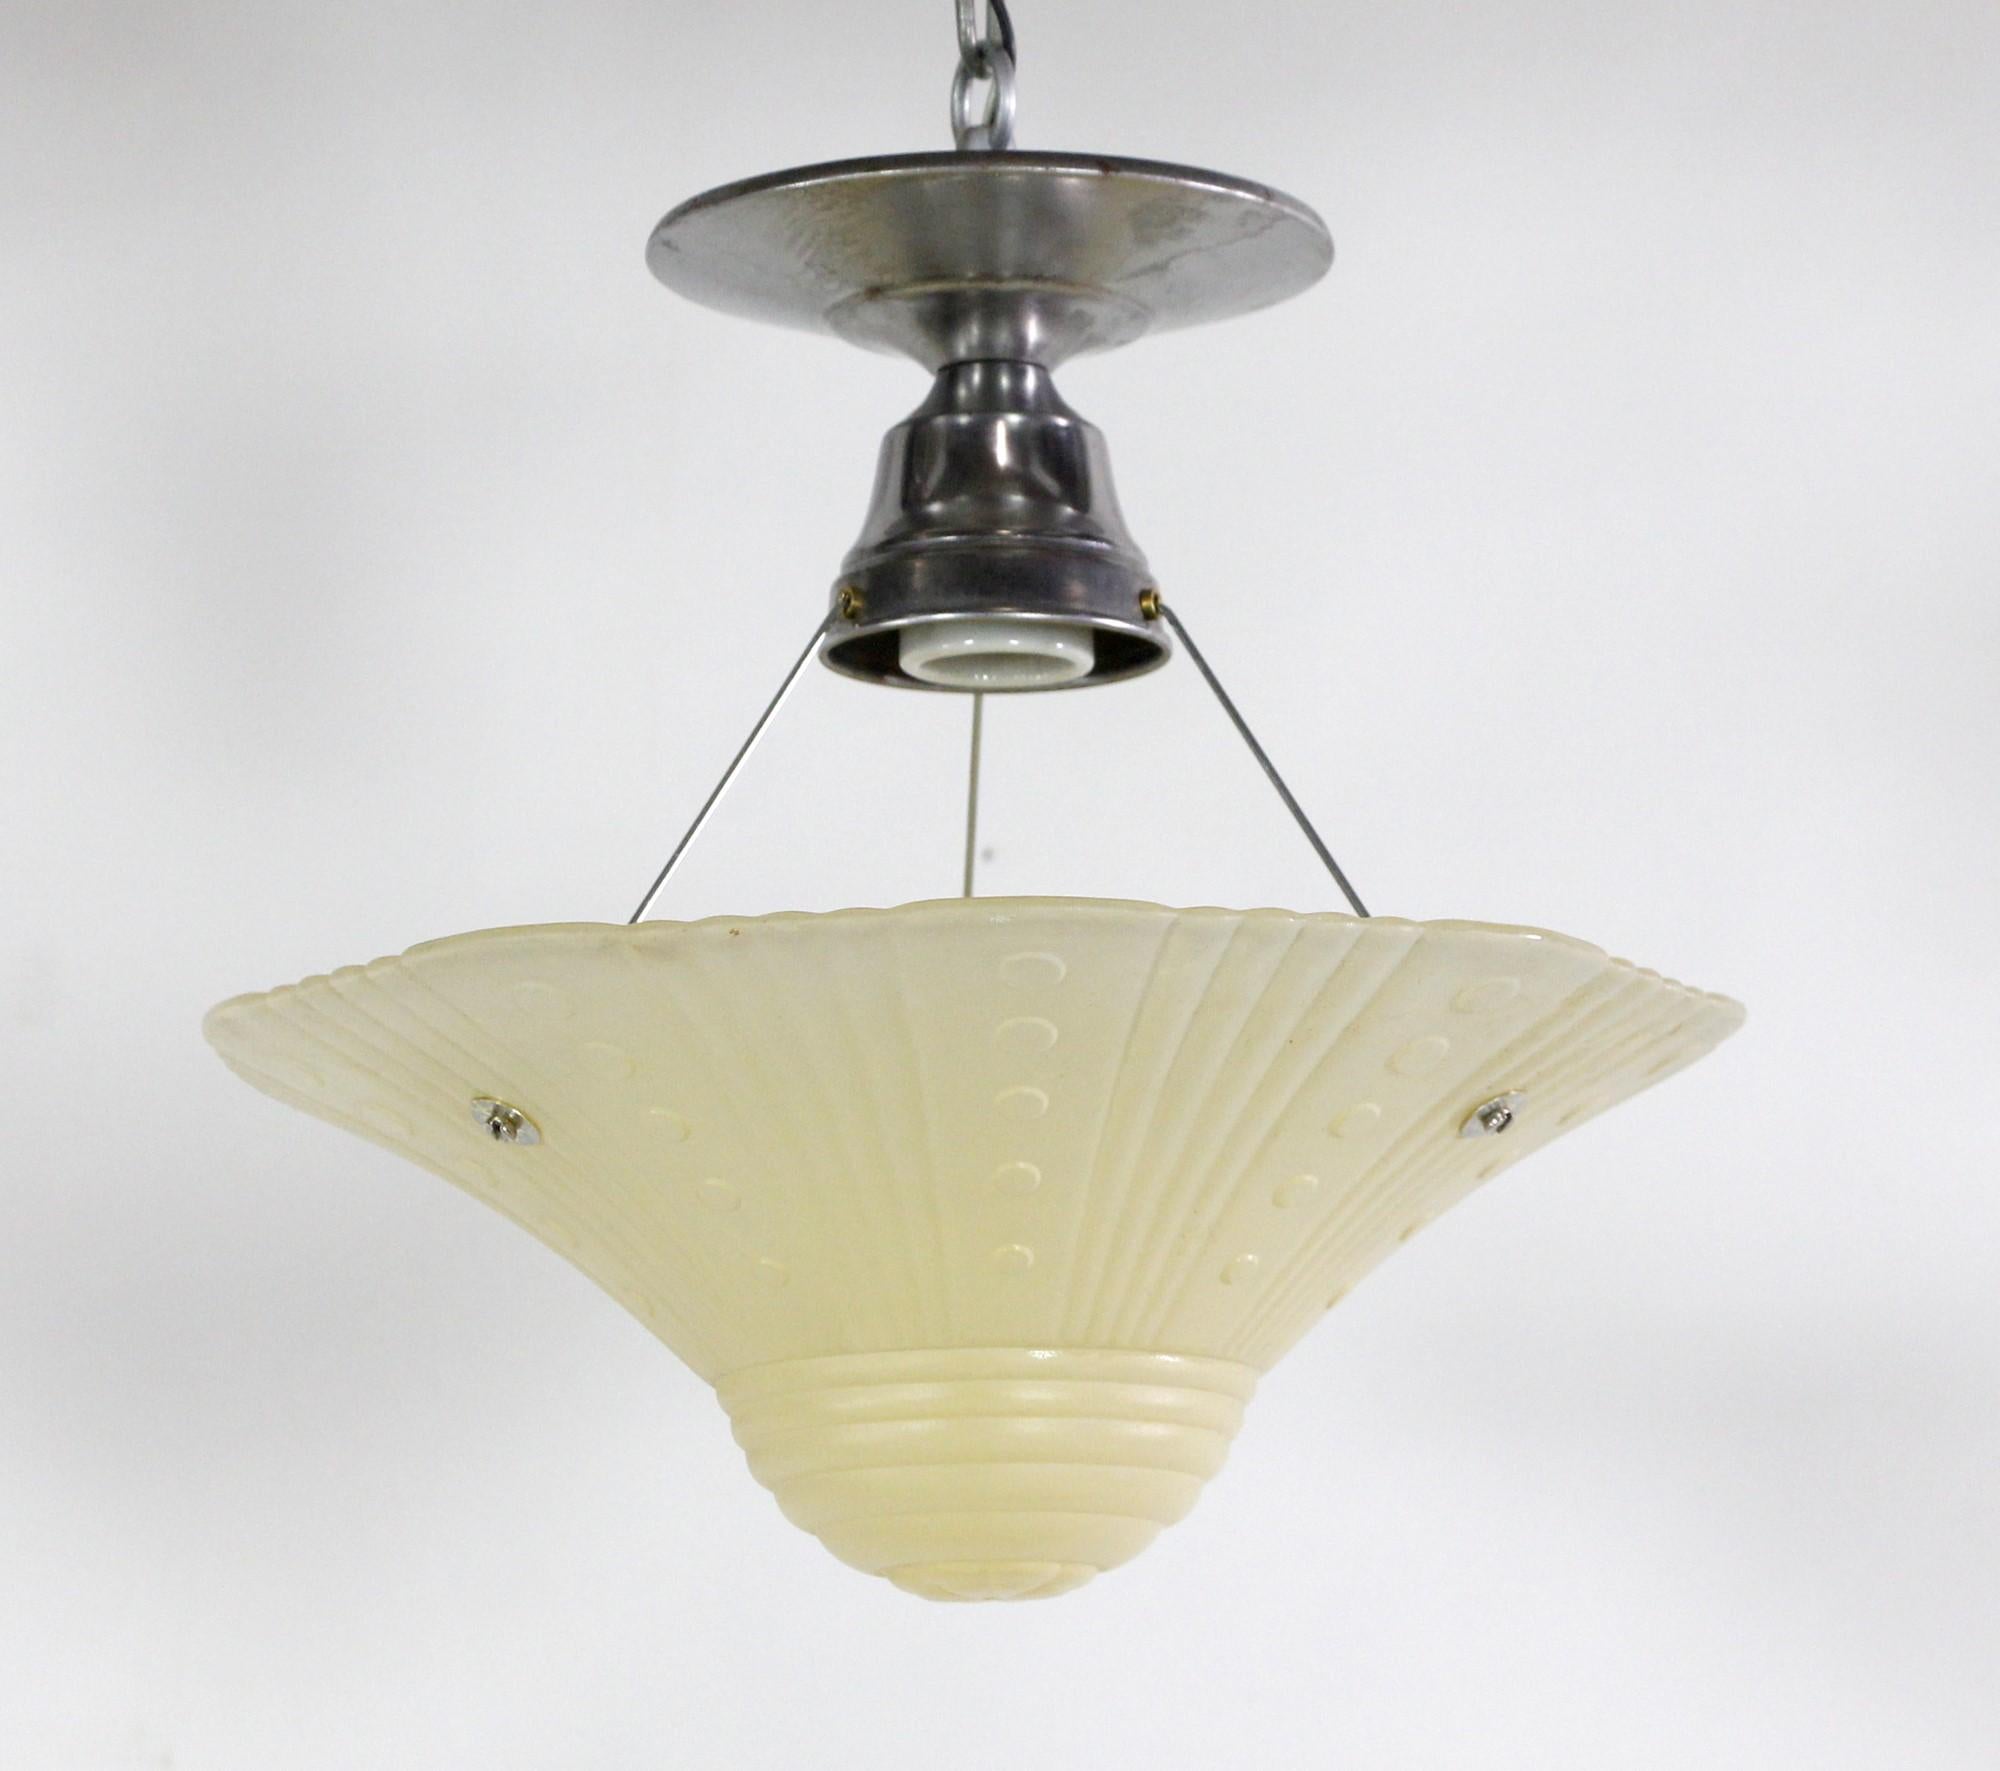 1940s Art Deco style dotted design glass shade light with a newly wired nickel plated steel fixture. Takes one E26 light bulb. This can be seen at our 400 Gilligan St location in Scranton, PA.